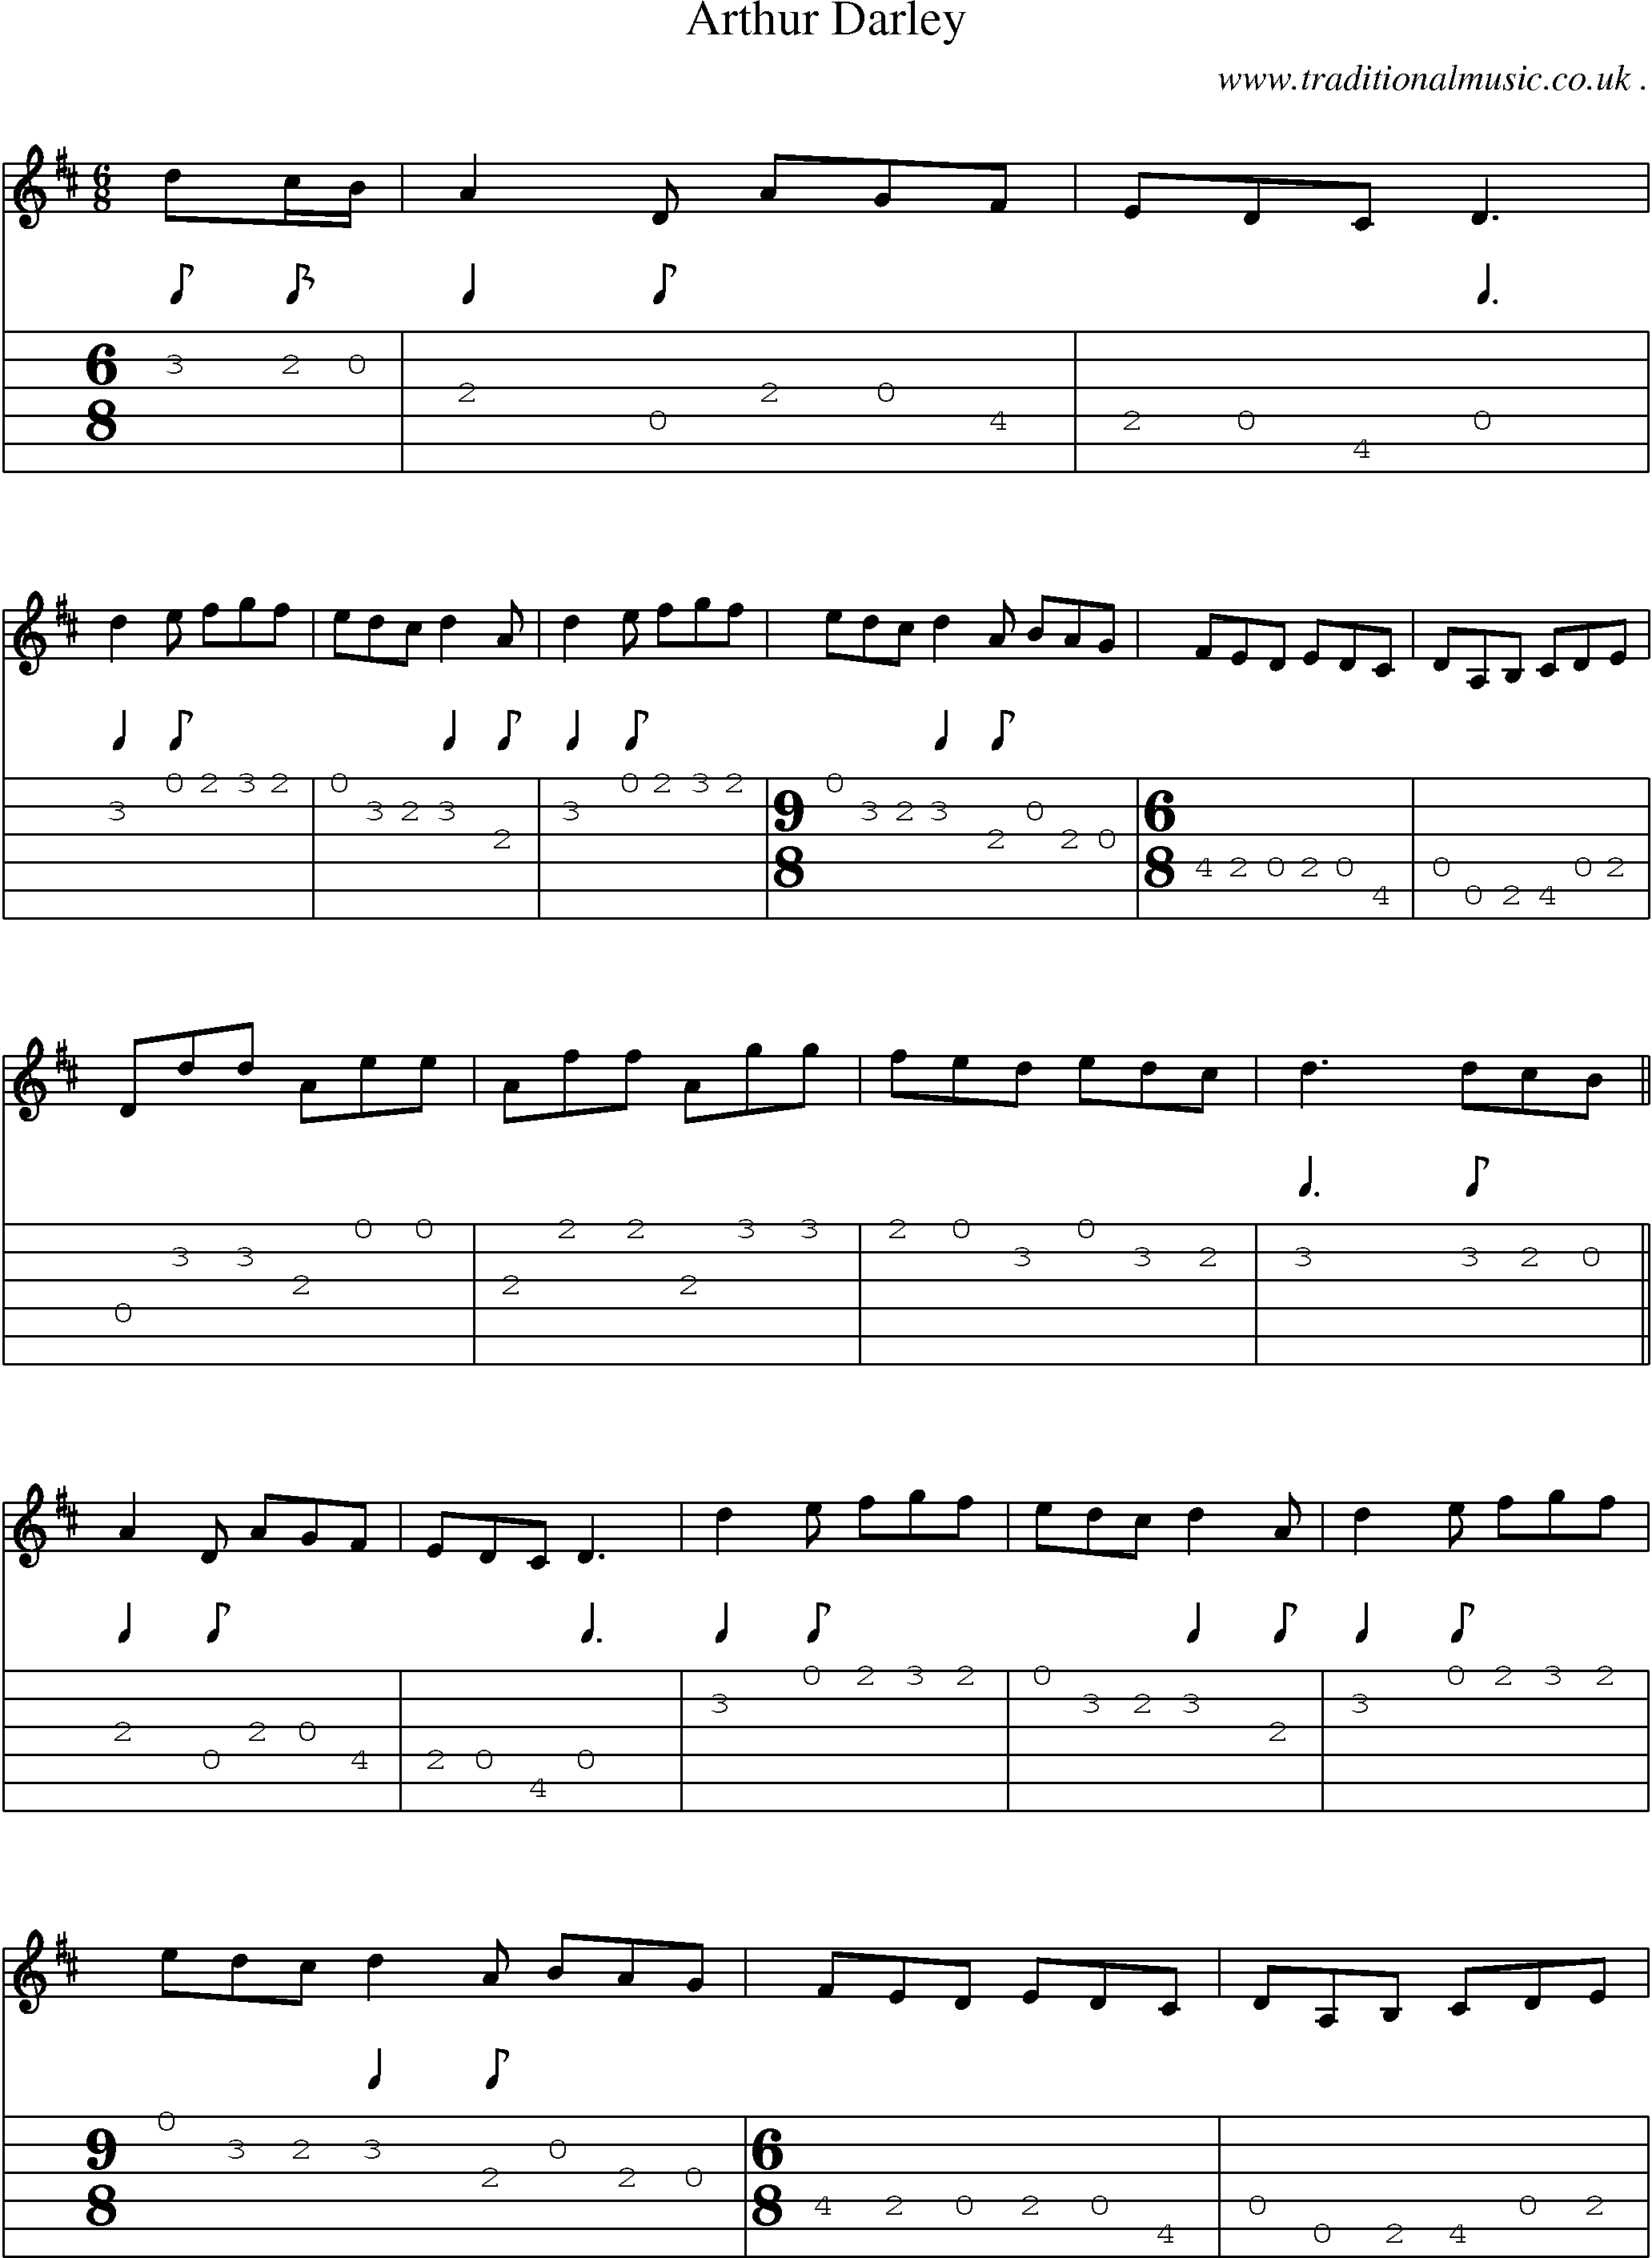 Sheet-Music and Guitar Tabs for Arthur Darley